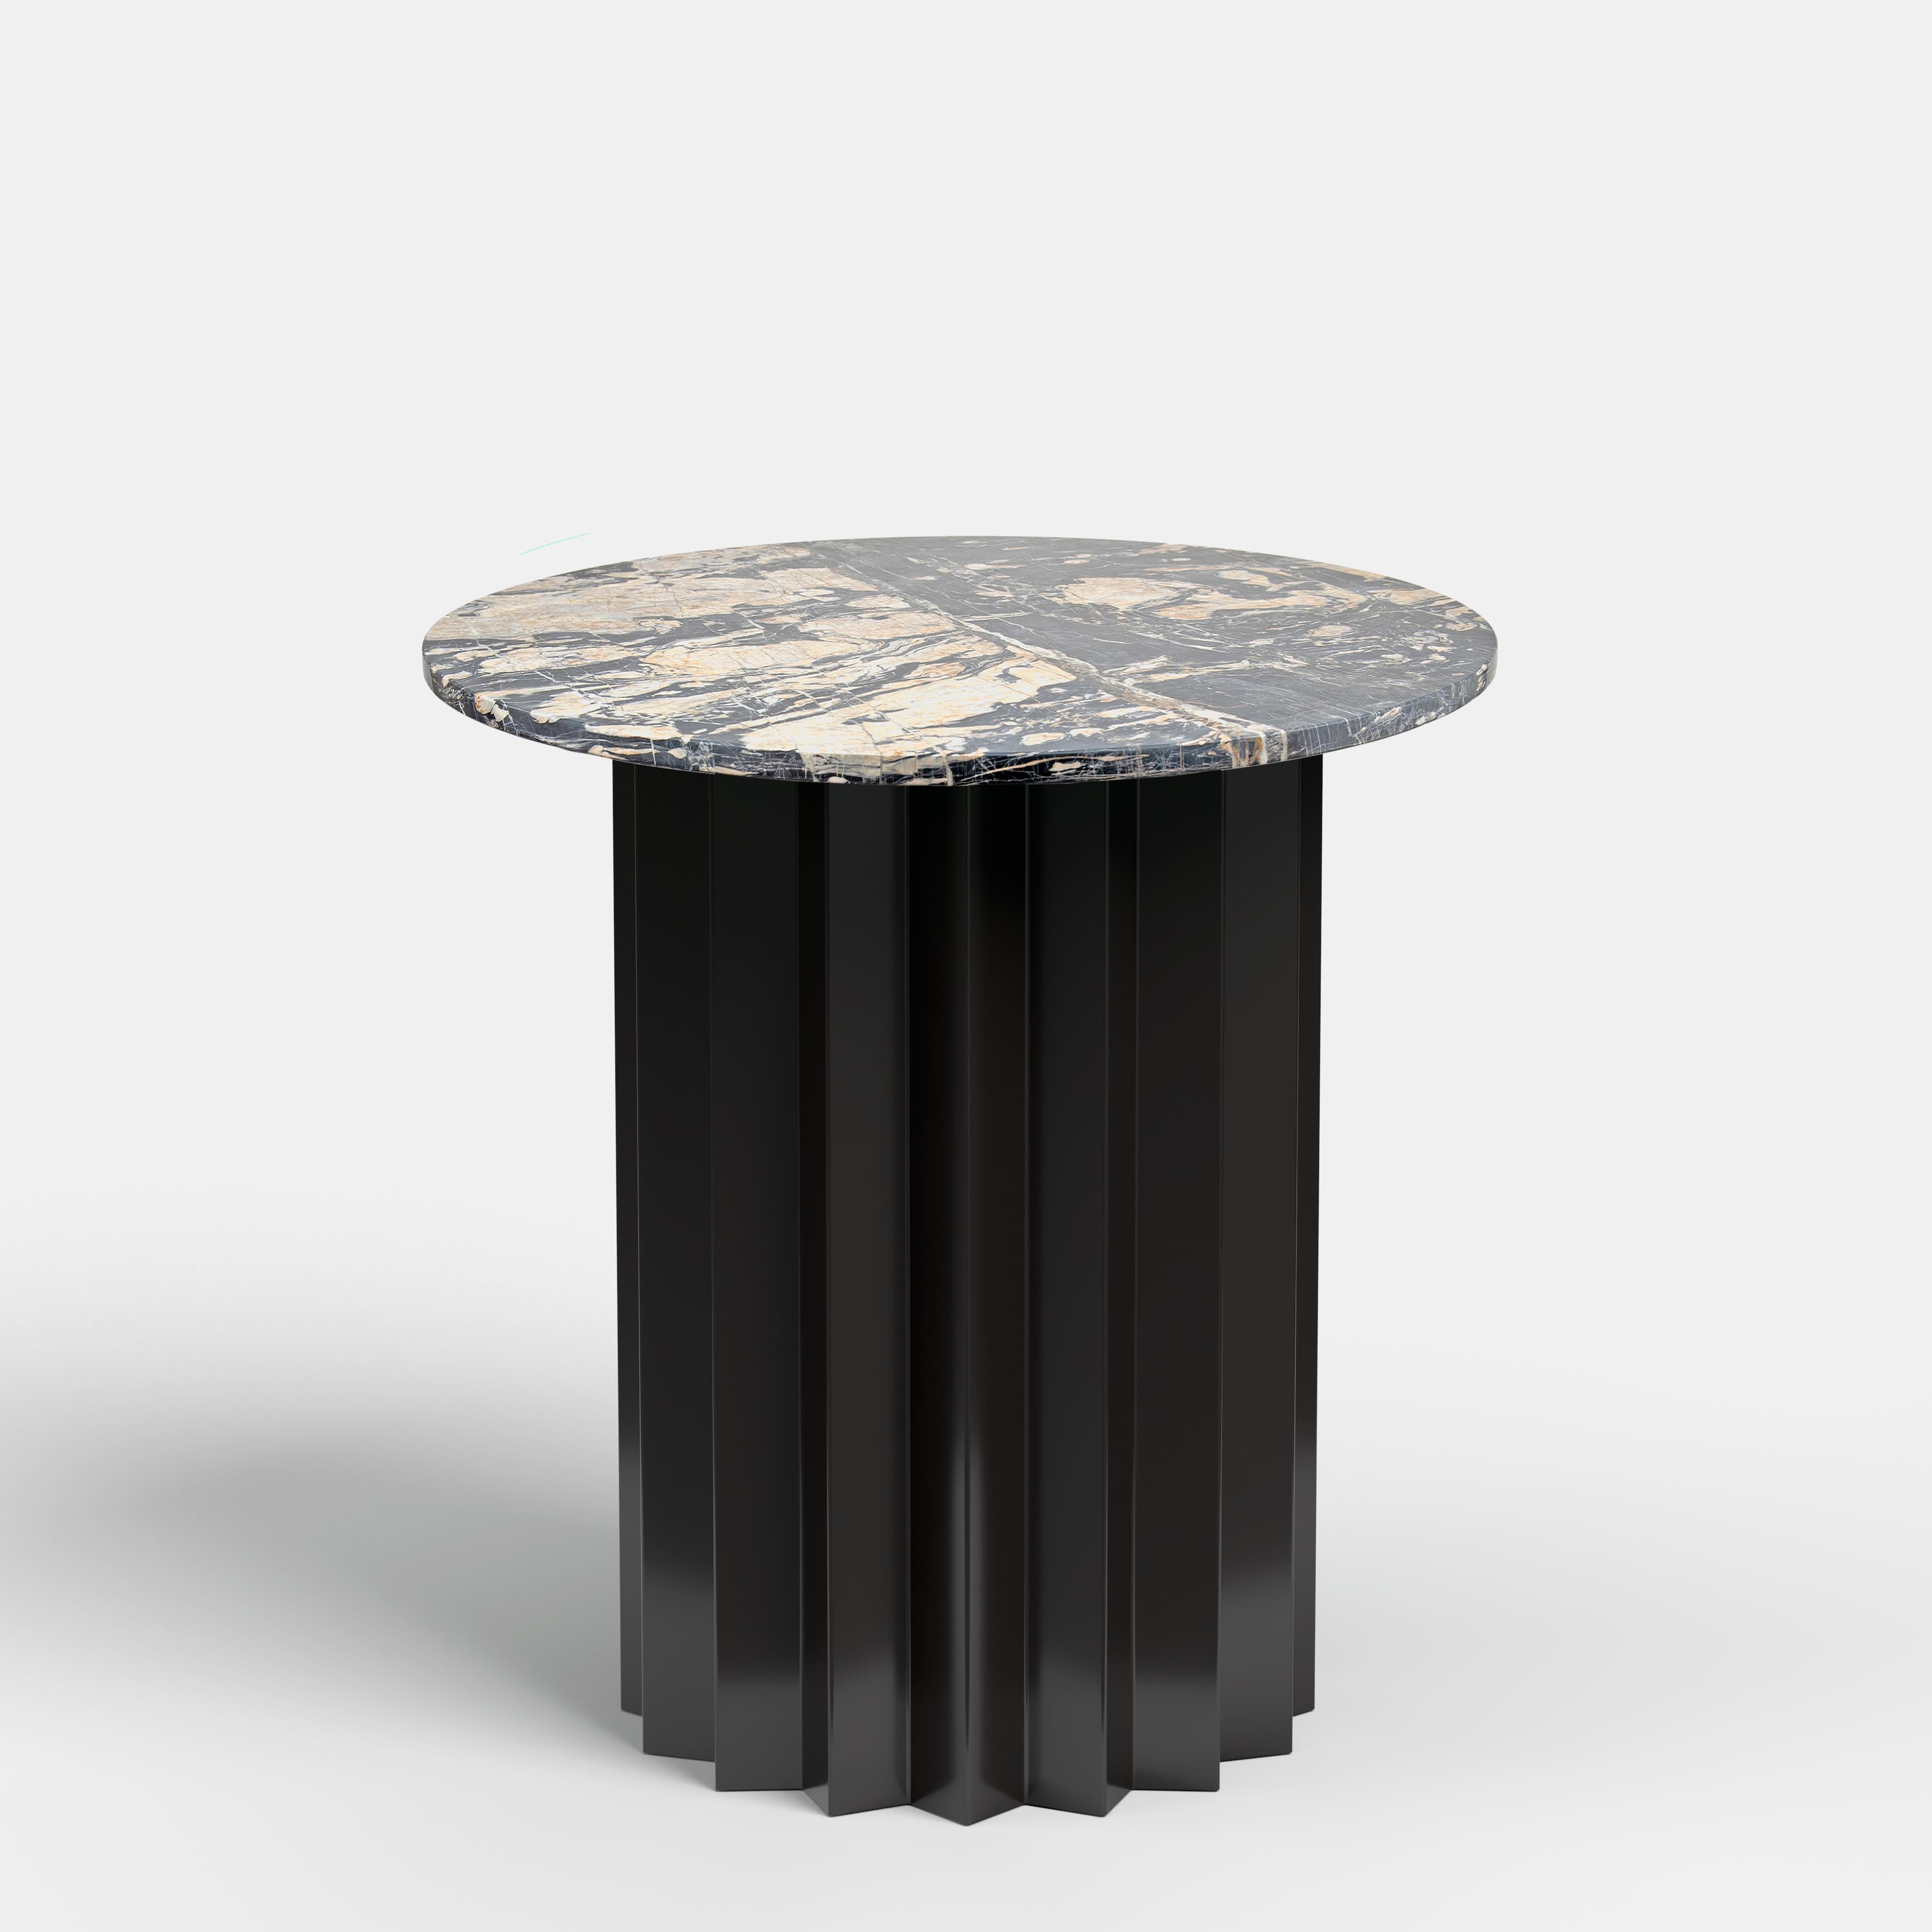 Volume is a collection of dining and side tables designed by DAY Studio in their unique simple and playful language. The powder coated metal base is completed with a table top selected from a distinguished choice of material and finish